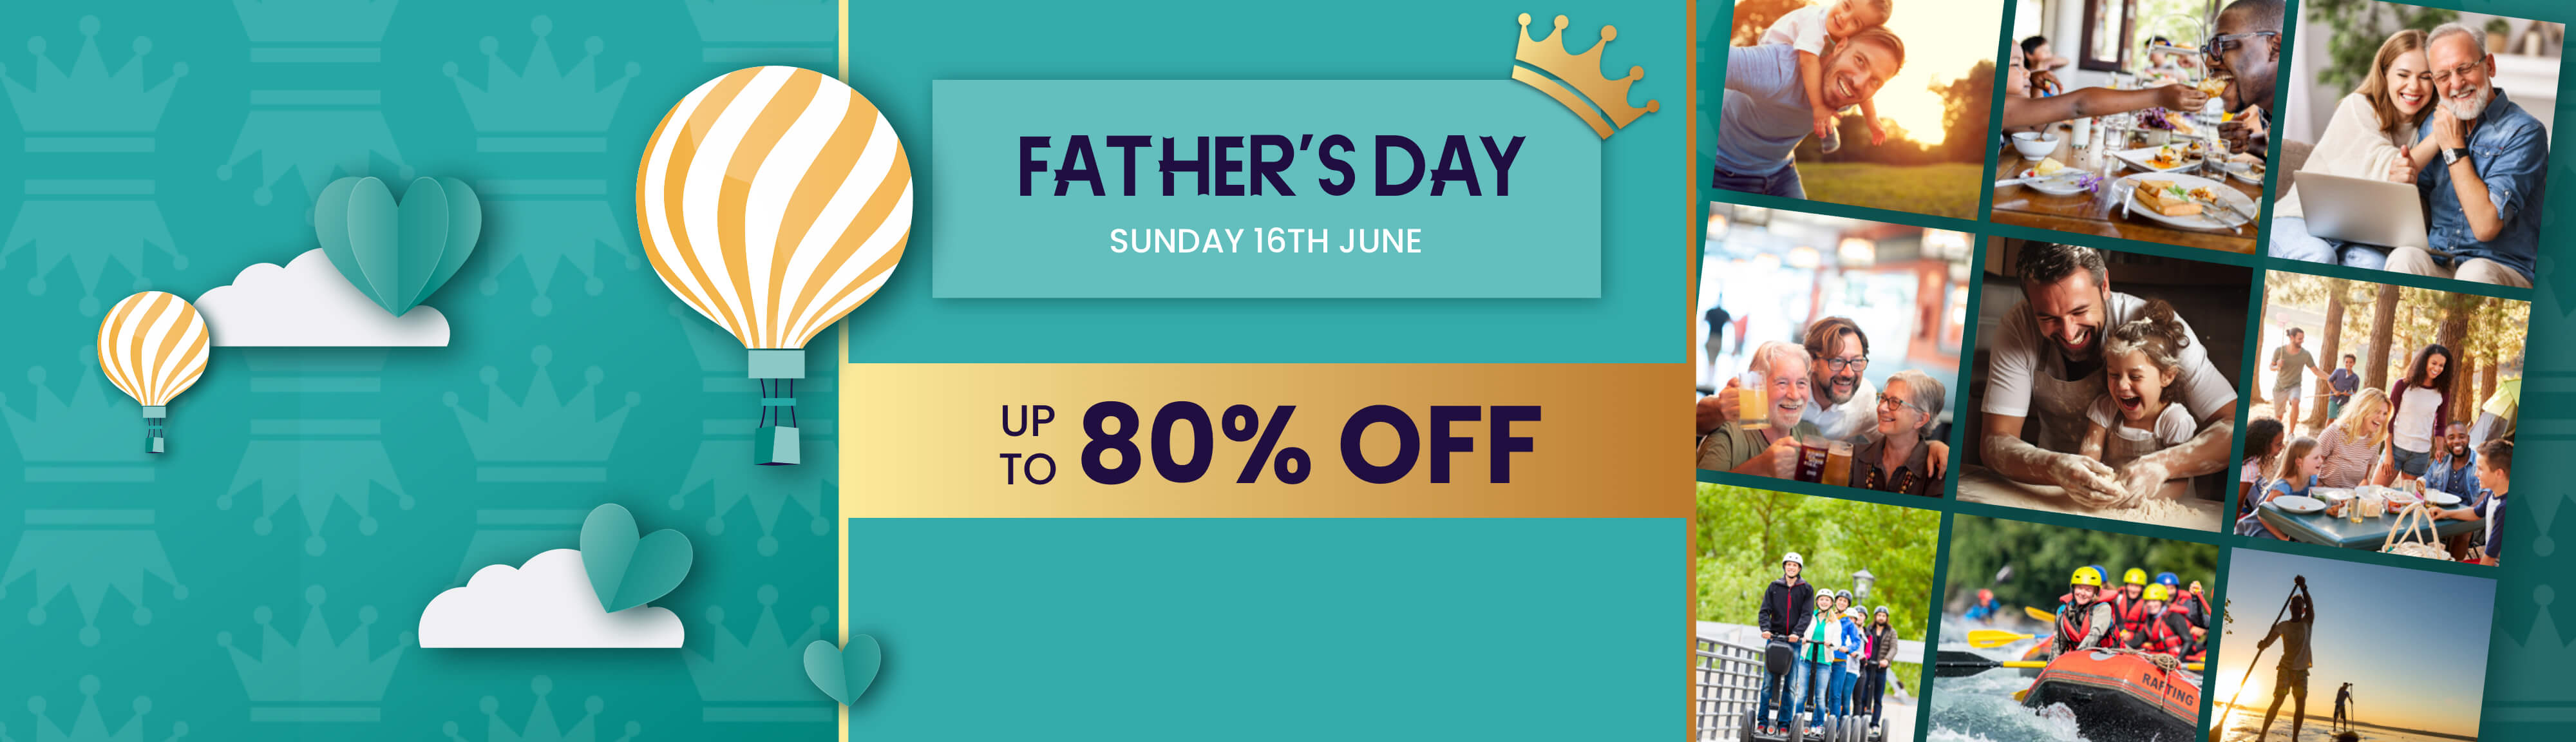 Father's Day - Up to 80% off